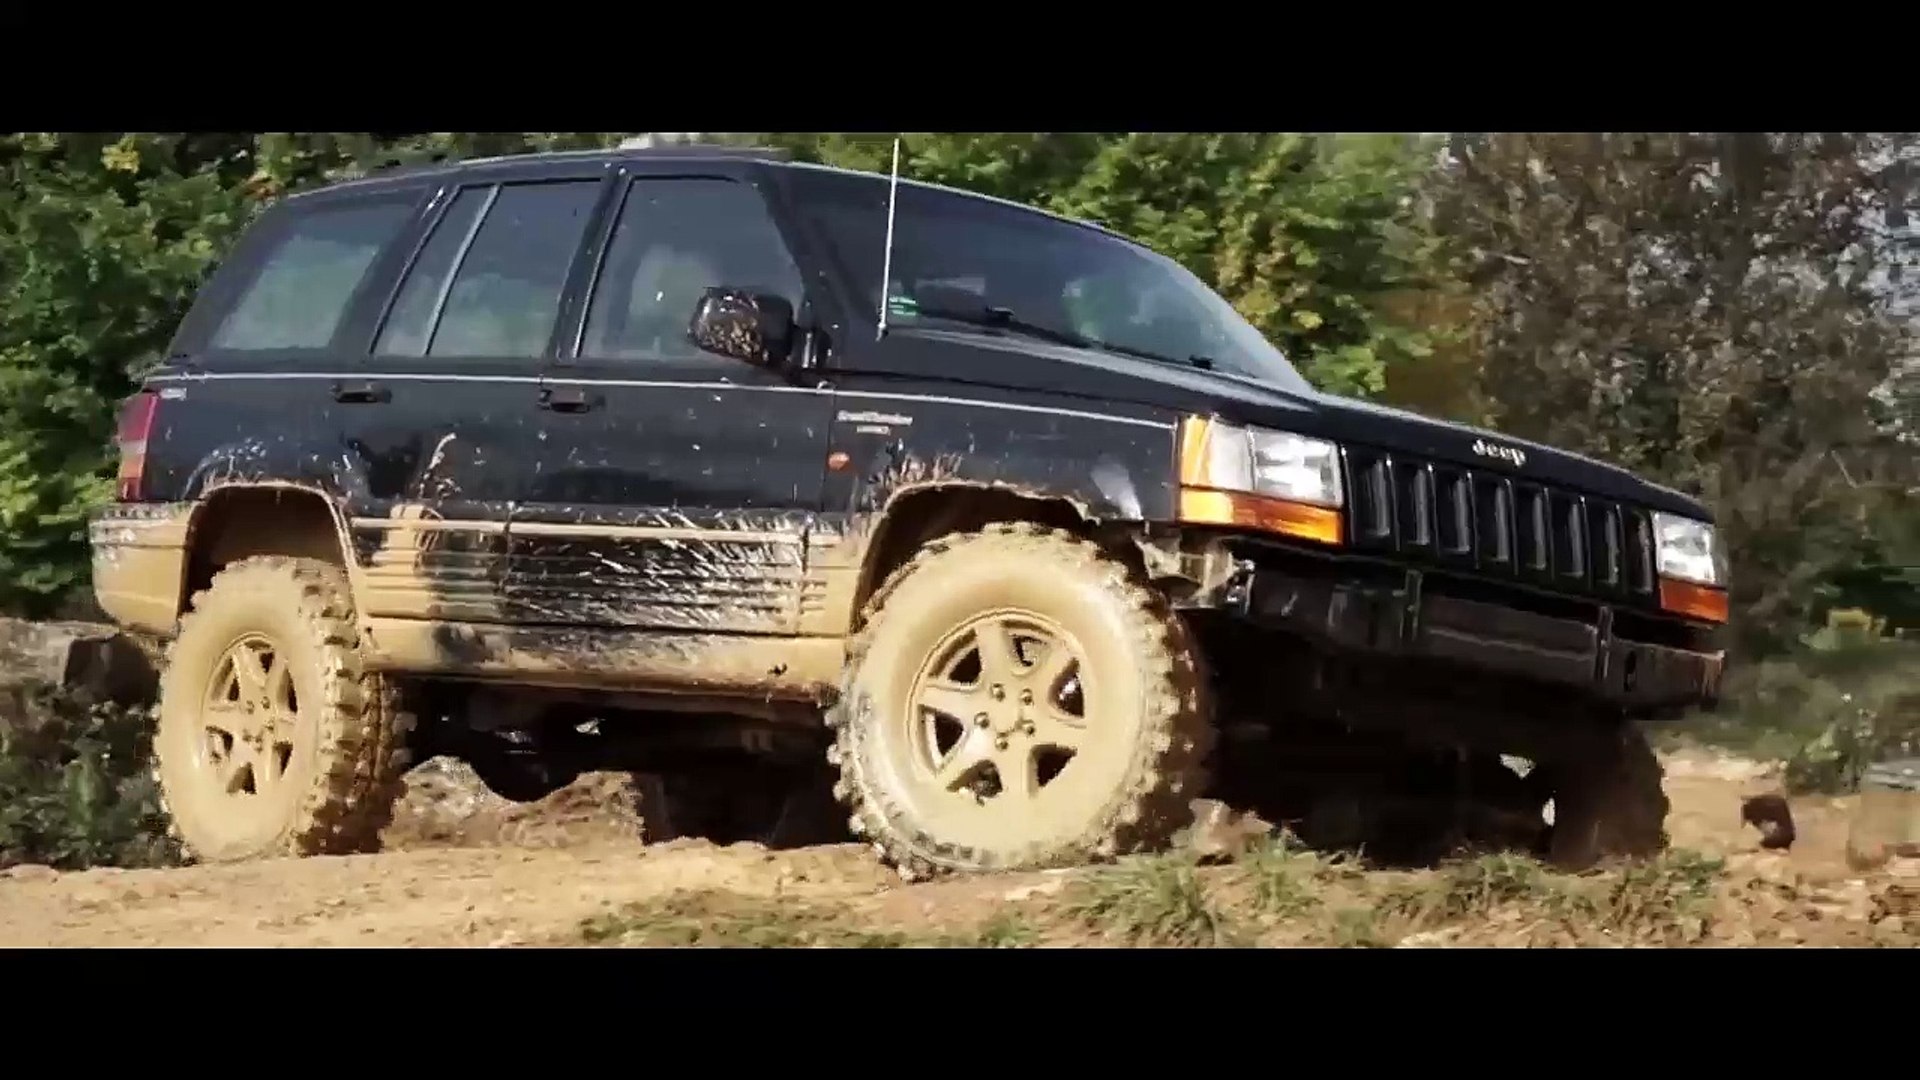 Jeep Grand Cherokee 5 2 V8 Zj The Offroad Monster Video Dailymotion